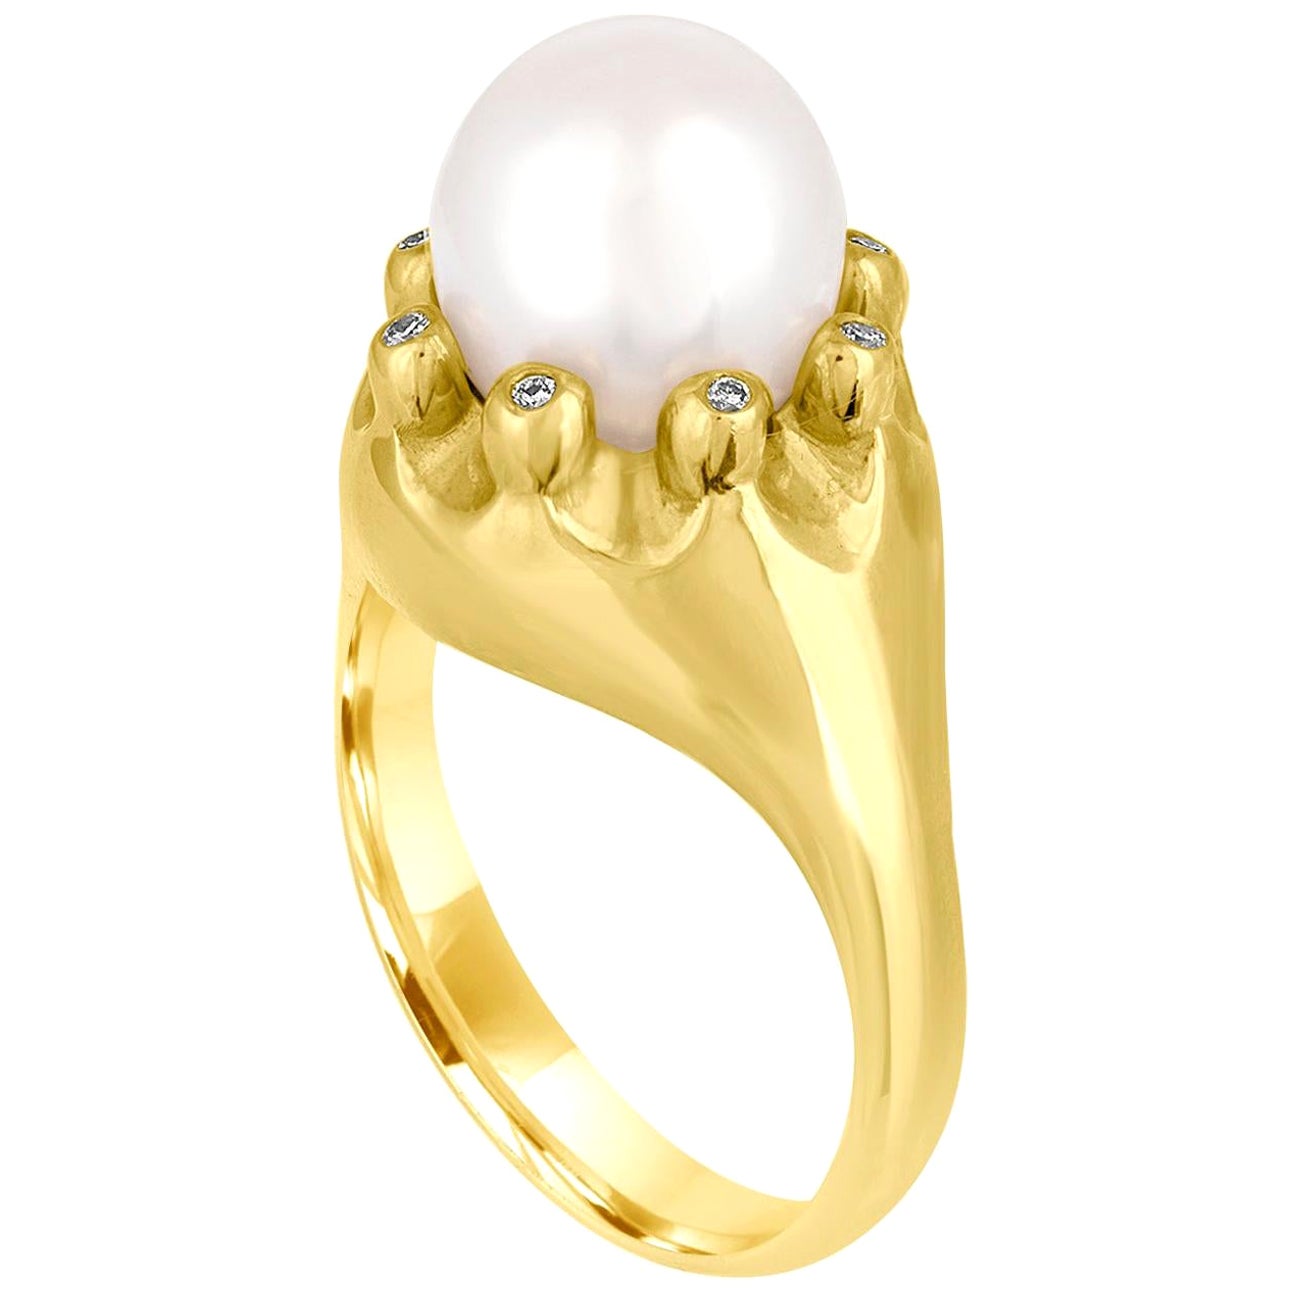 Fresh Water Pearl and Diamond Gold Ring